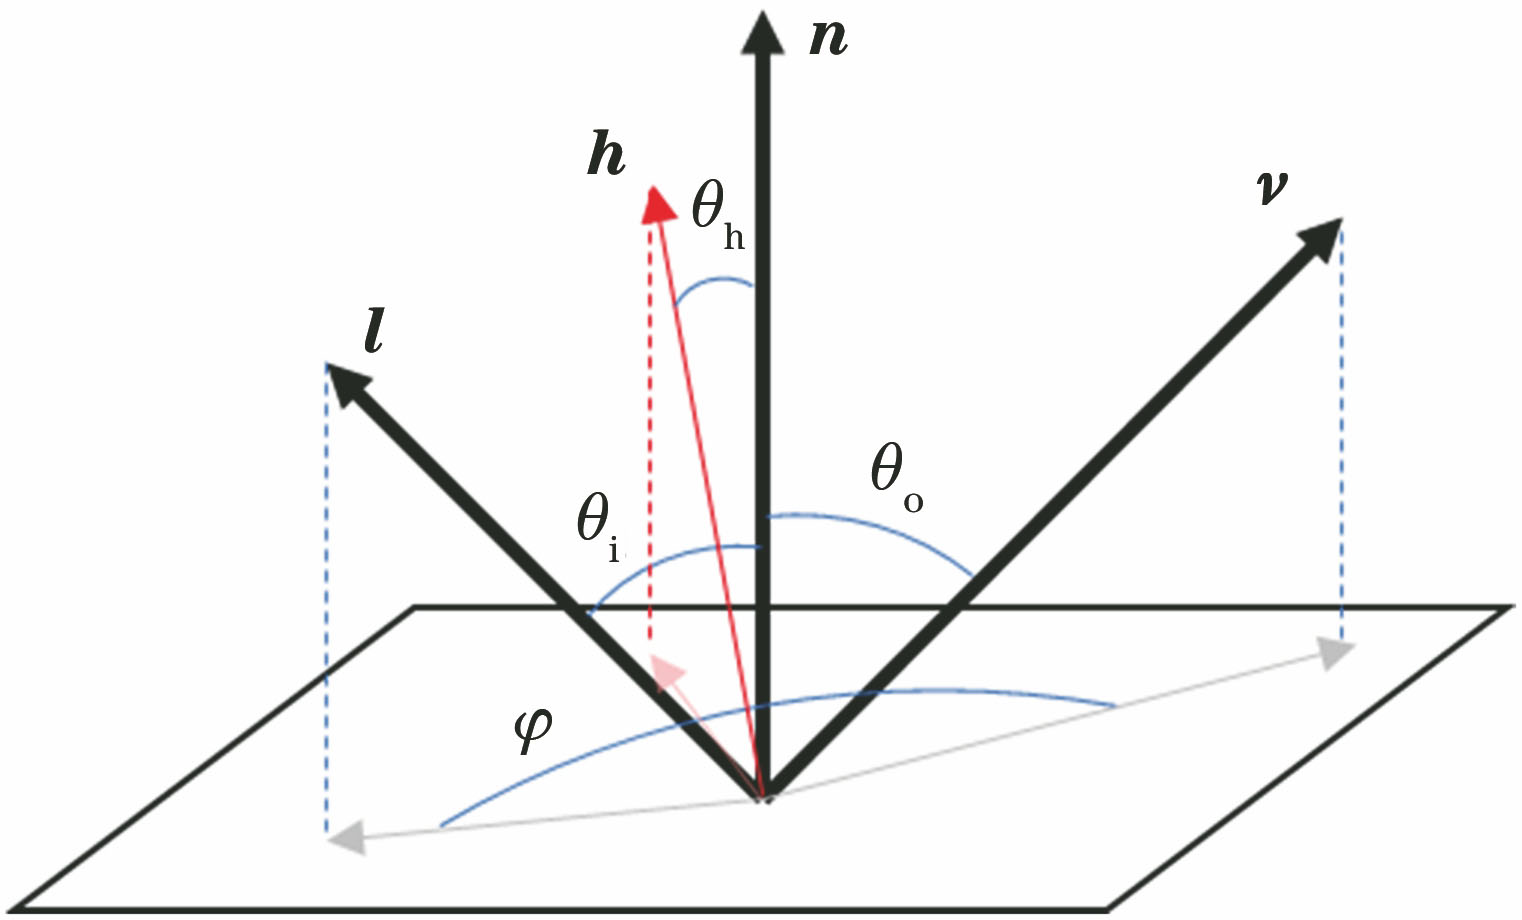 Schematic of bidirectional reflection on object surface